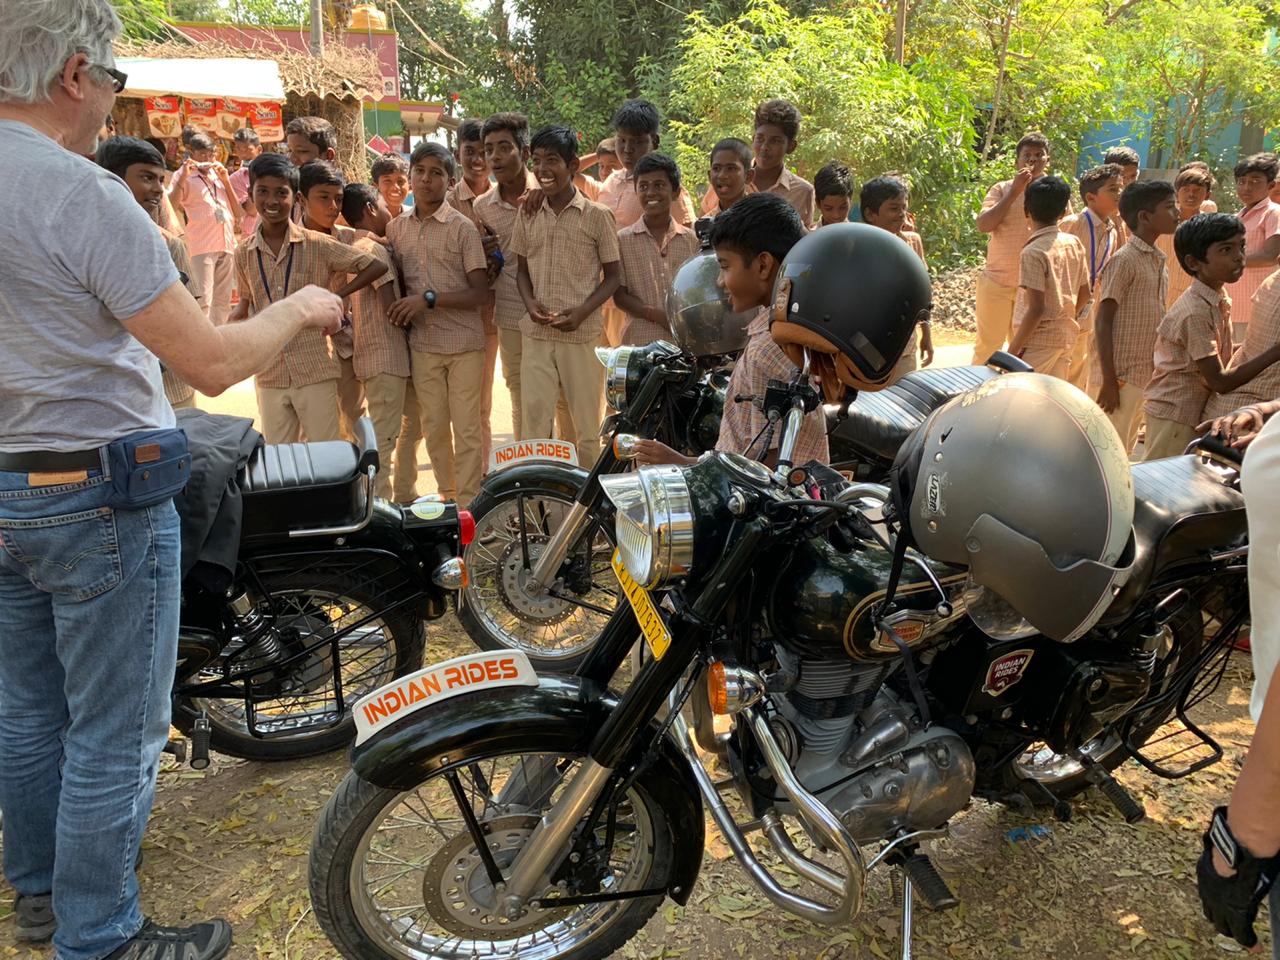 Bike riders Meet school children I Group Motorcycle Tours To South India I An Adventurous road trip to India on Motorcycle